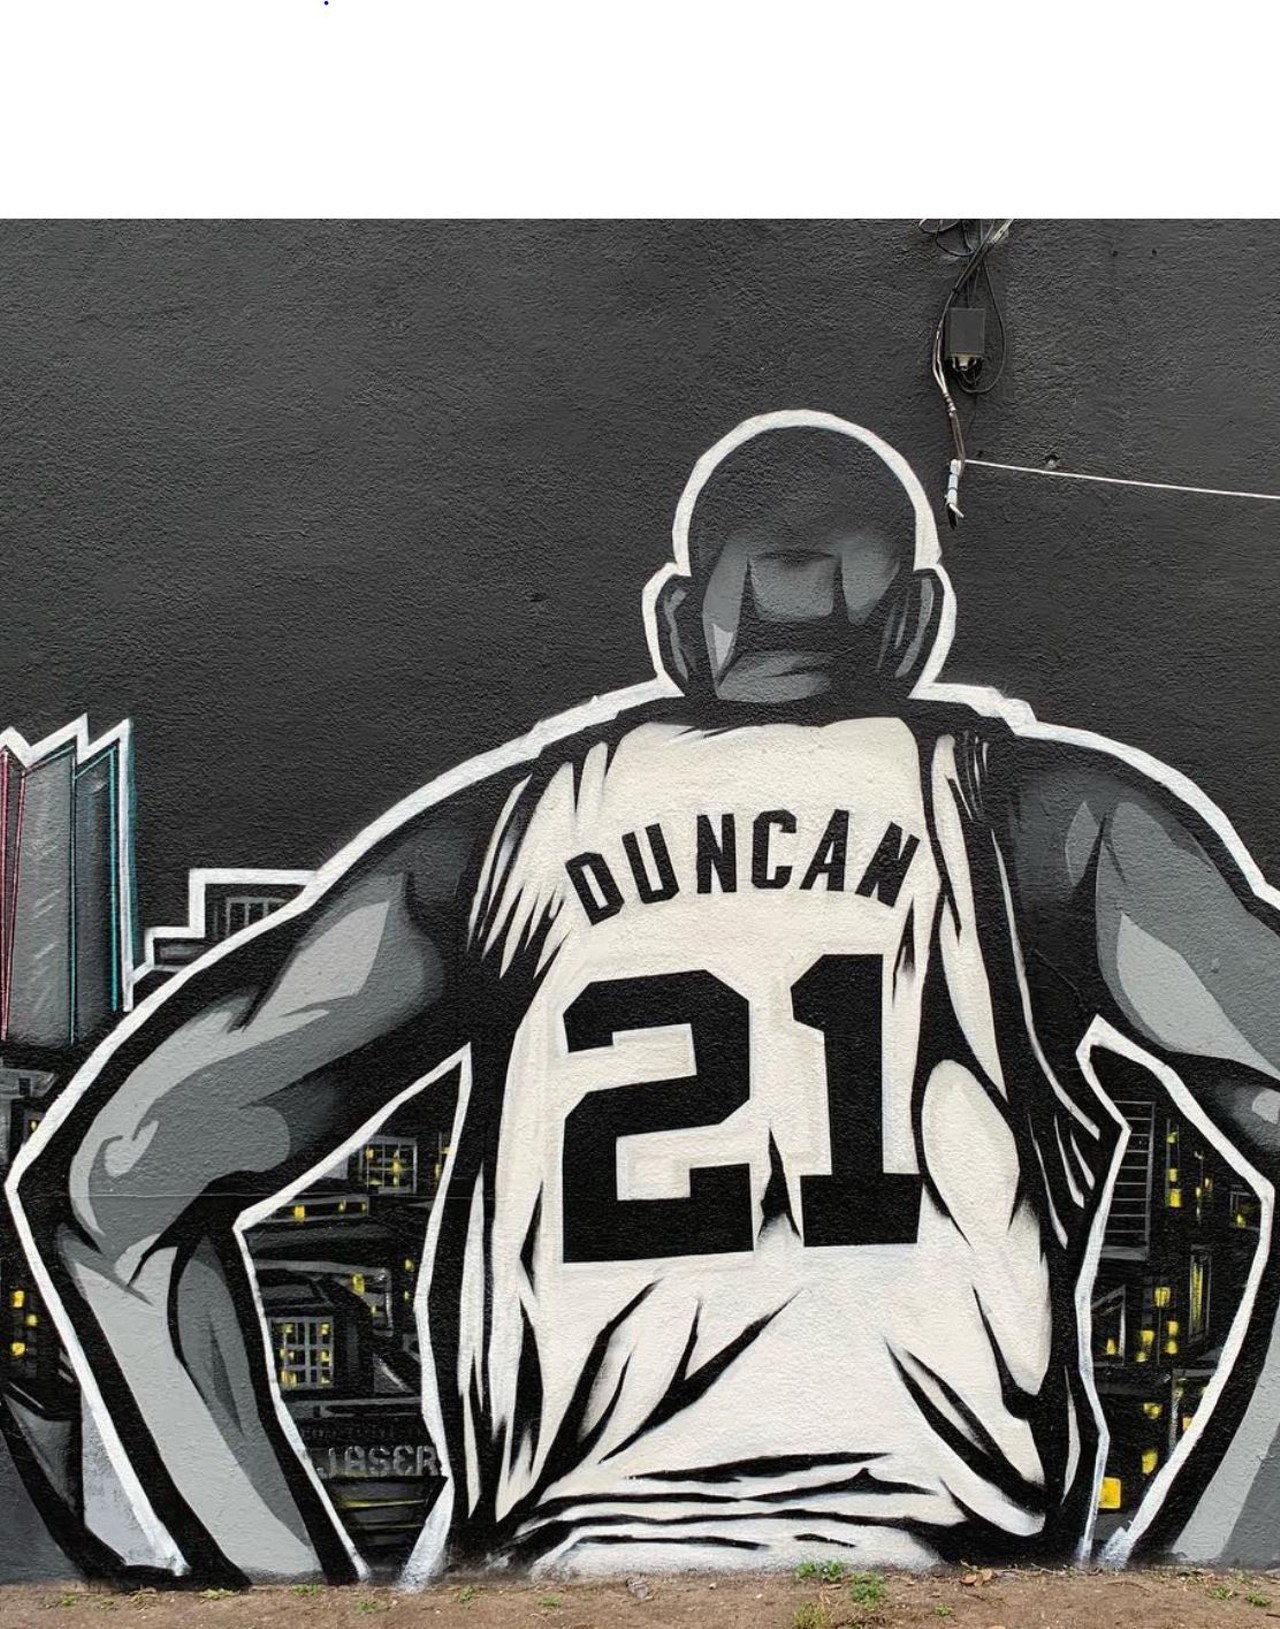 Take selfies in front of all the Spurs murals around town
Multiple locations, here’s a map! nba.com
We’re not really sure that this is a terribly romantic date idea, but the fun part about taking selfies in front of the Spurs murals is that you can share in the joy of loving the Spurs with your one-and-only. Plus, these selfies are like almost as good as taking a selfie with a live Spur, and just as iconic.
Photo via Instagram / ekosr